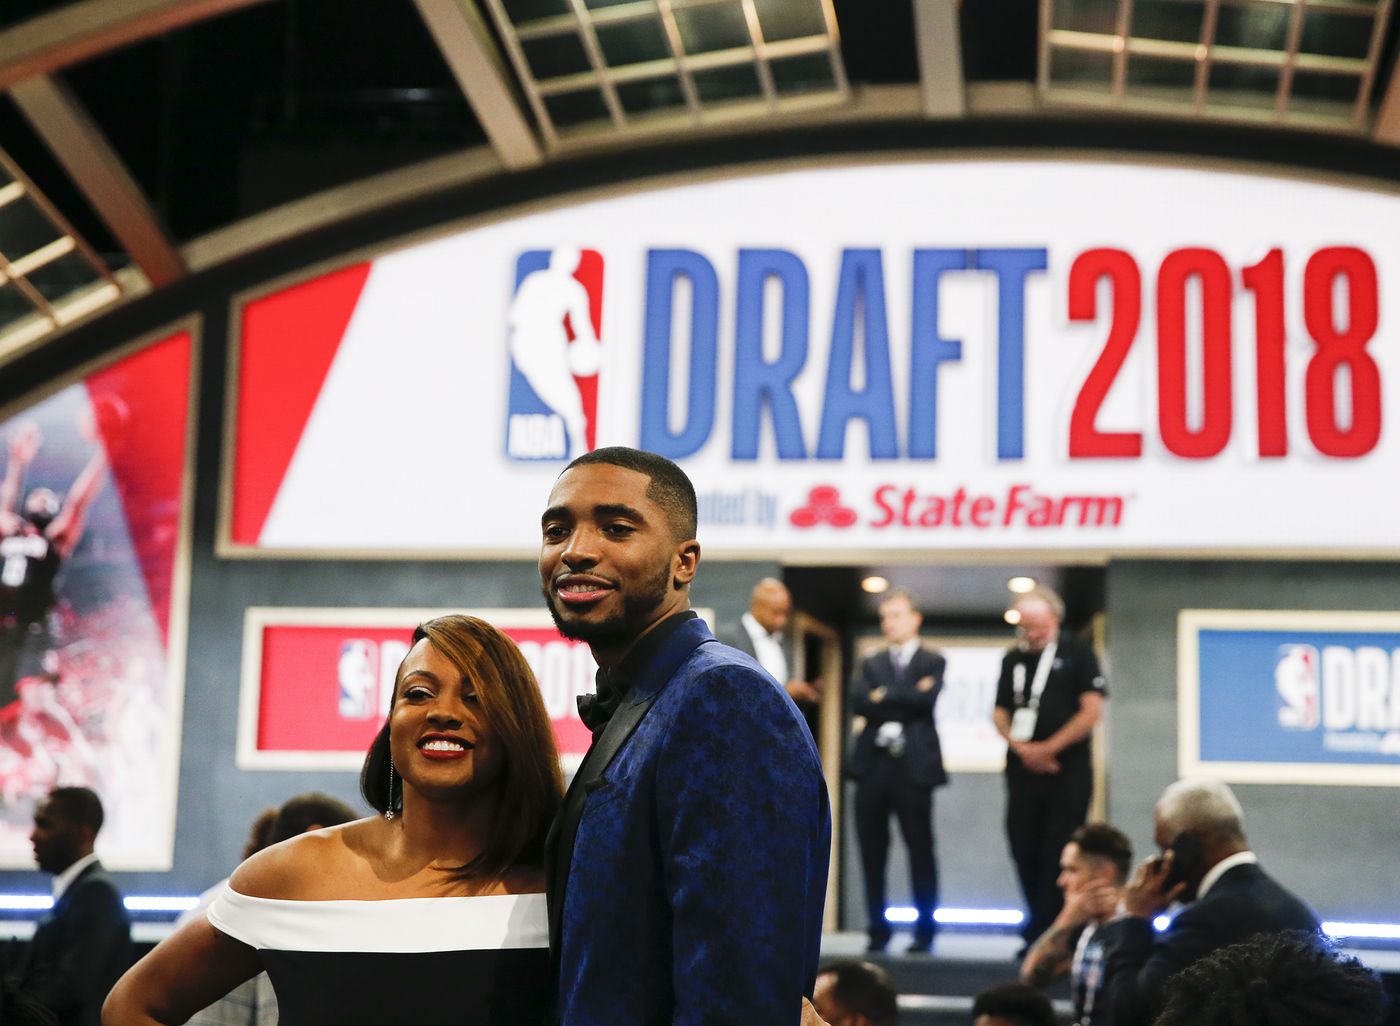 Tyneeha Rivers joined her son, Mikal Bridges, at the 2018 NBA draft. He was picked in the first round by the Sixers before being traded to the Suns.